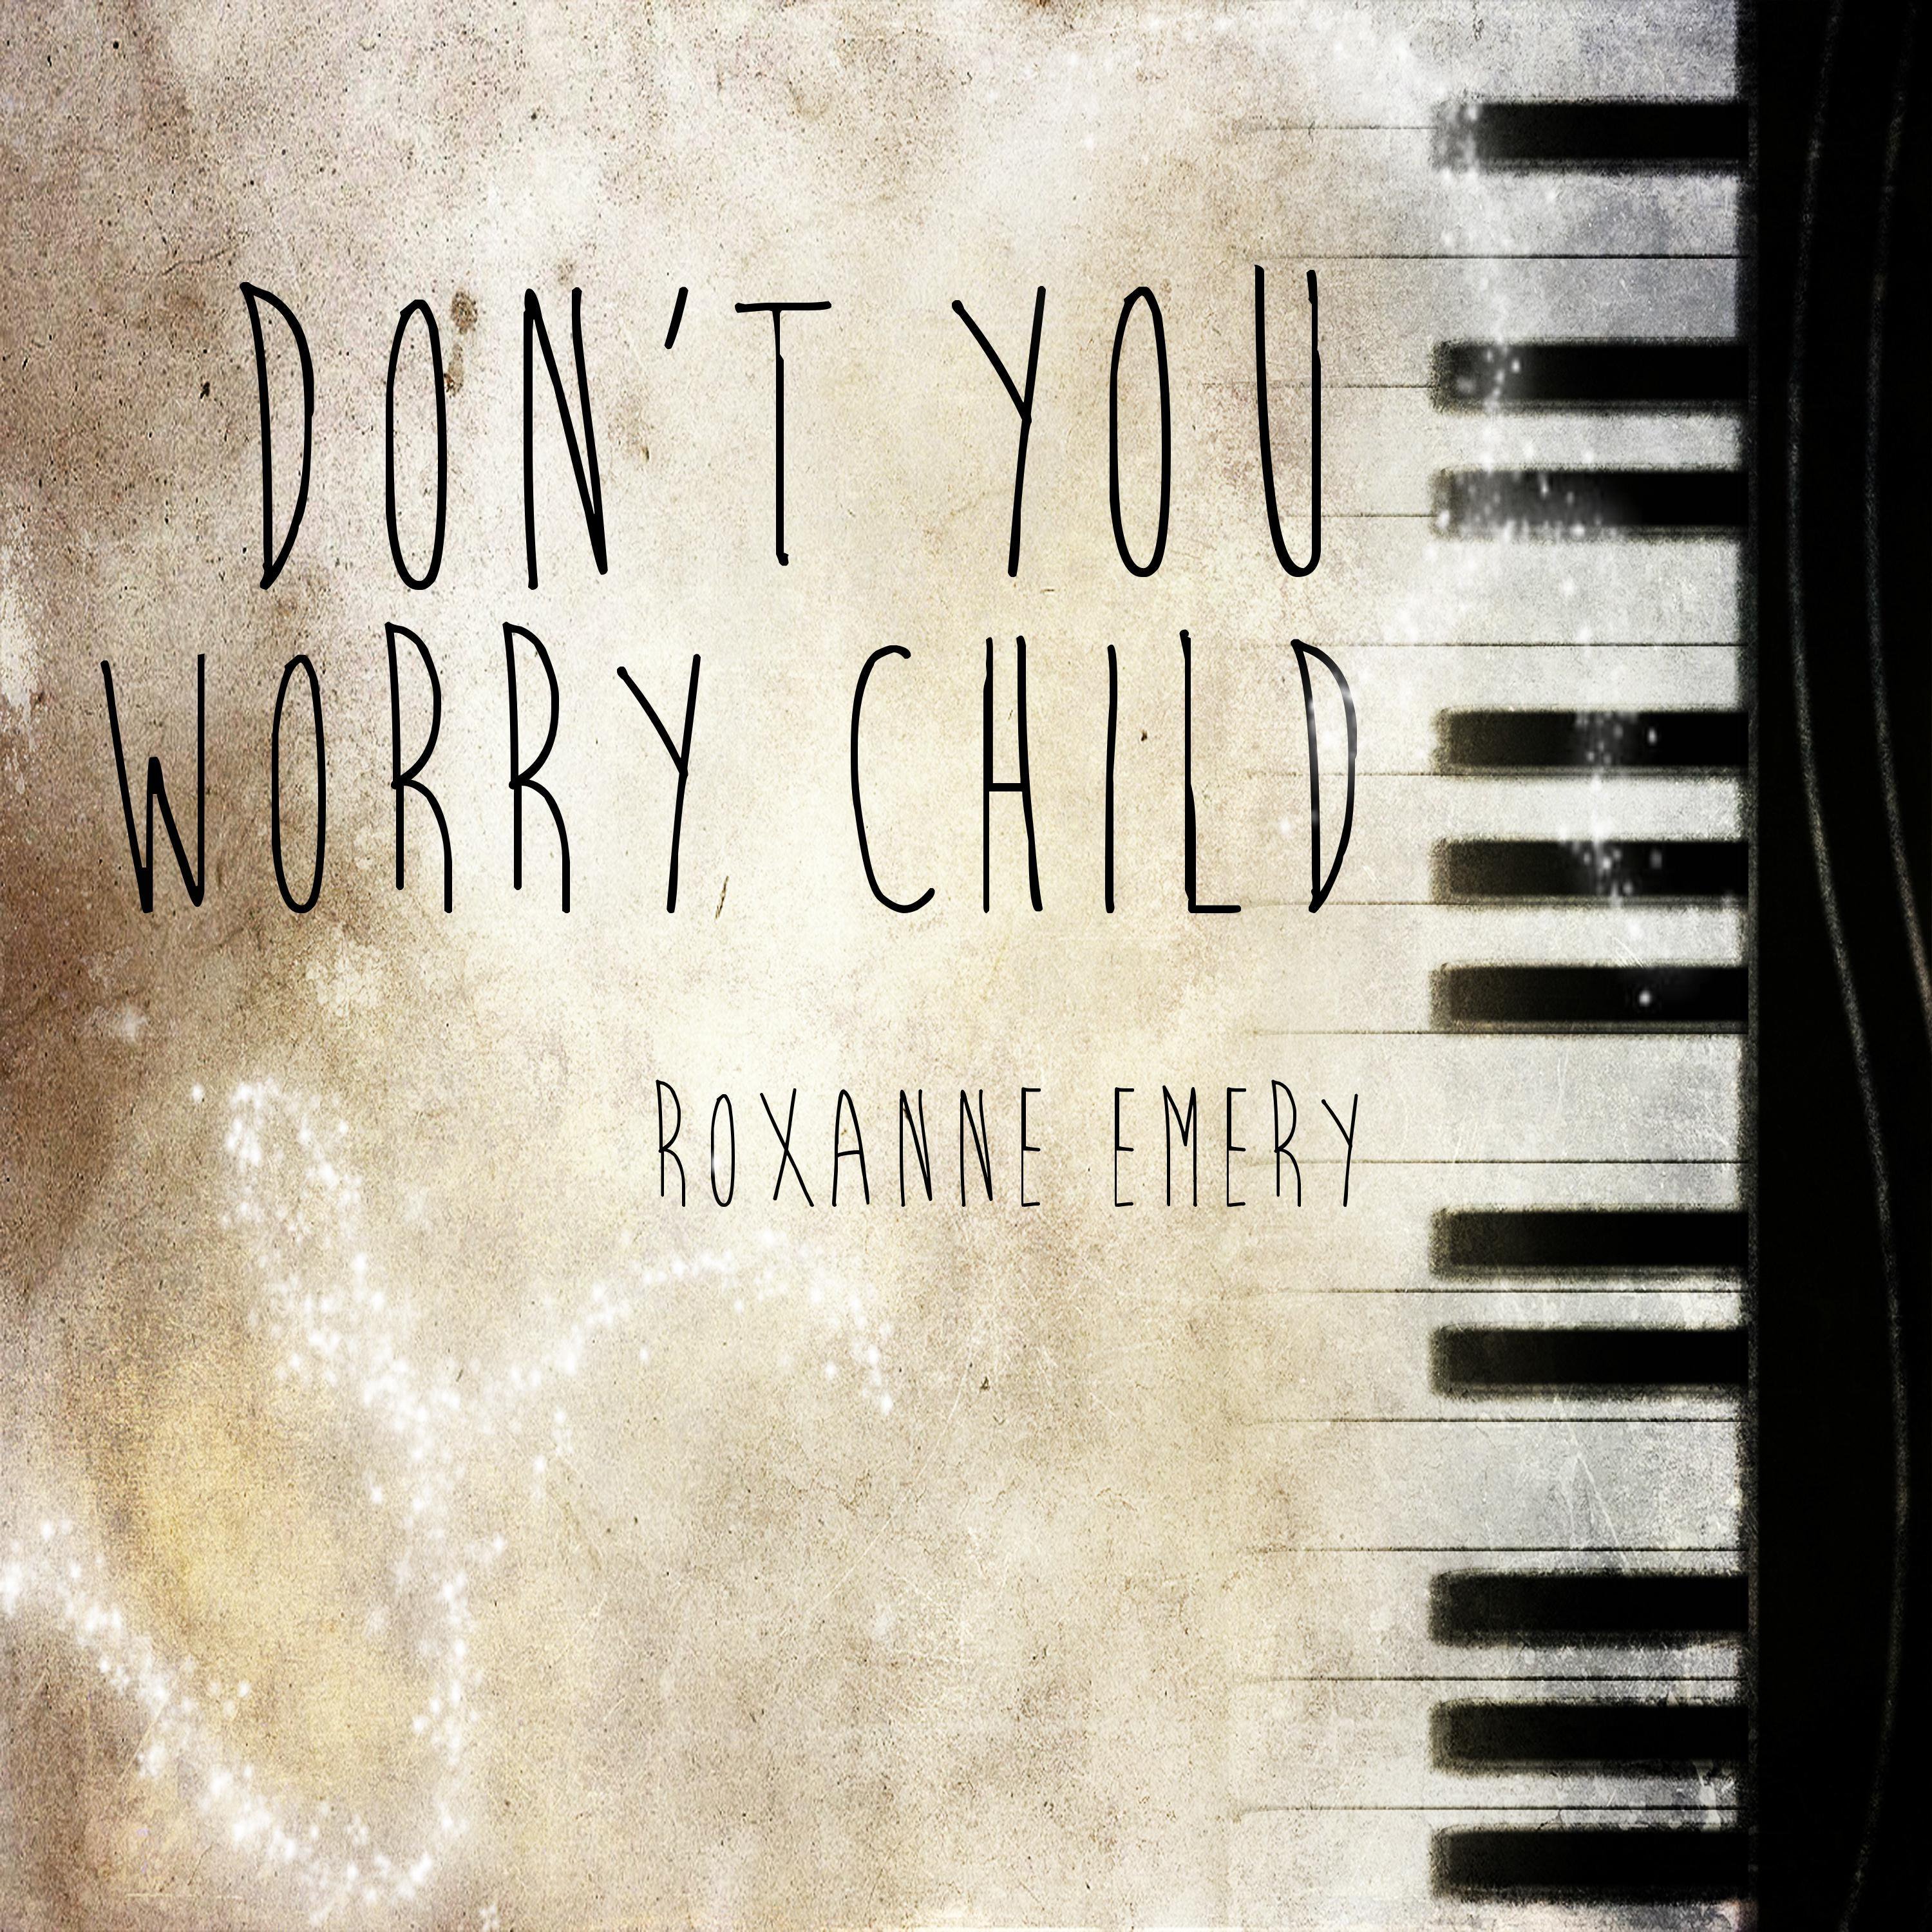 New don t you worry. Don't worry обложка. Roxanne Emery. Альбом don't you worry. Don't you worry обложка.